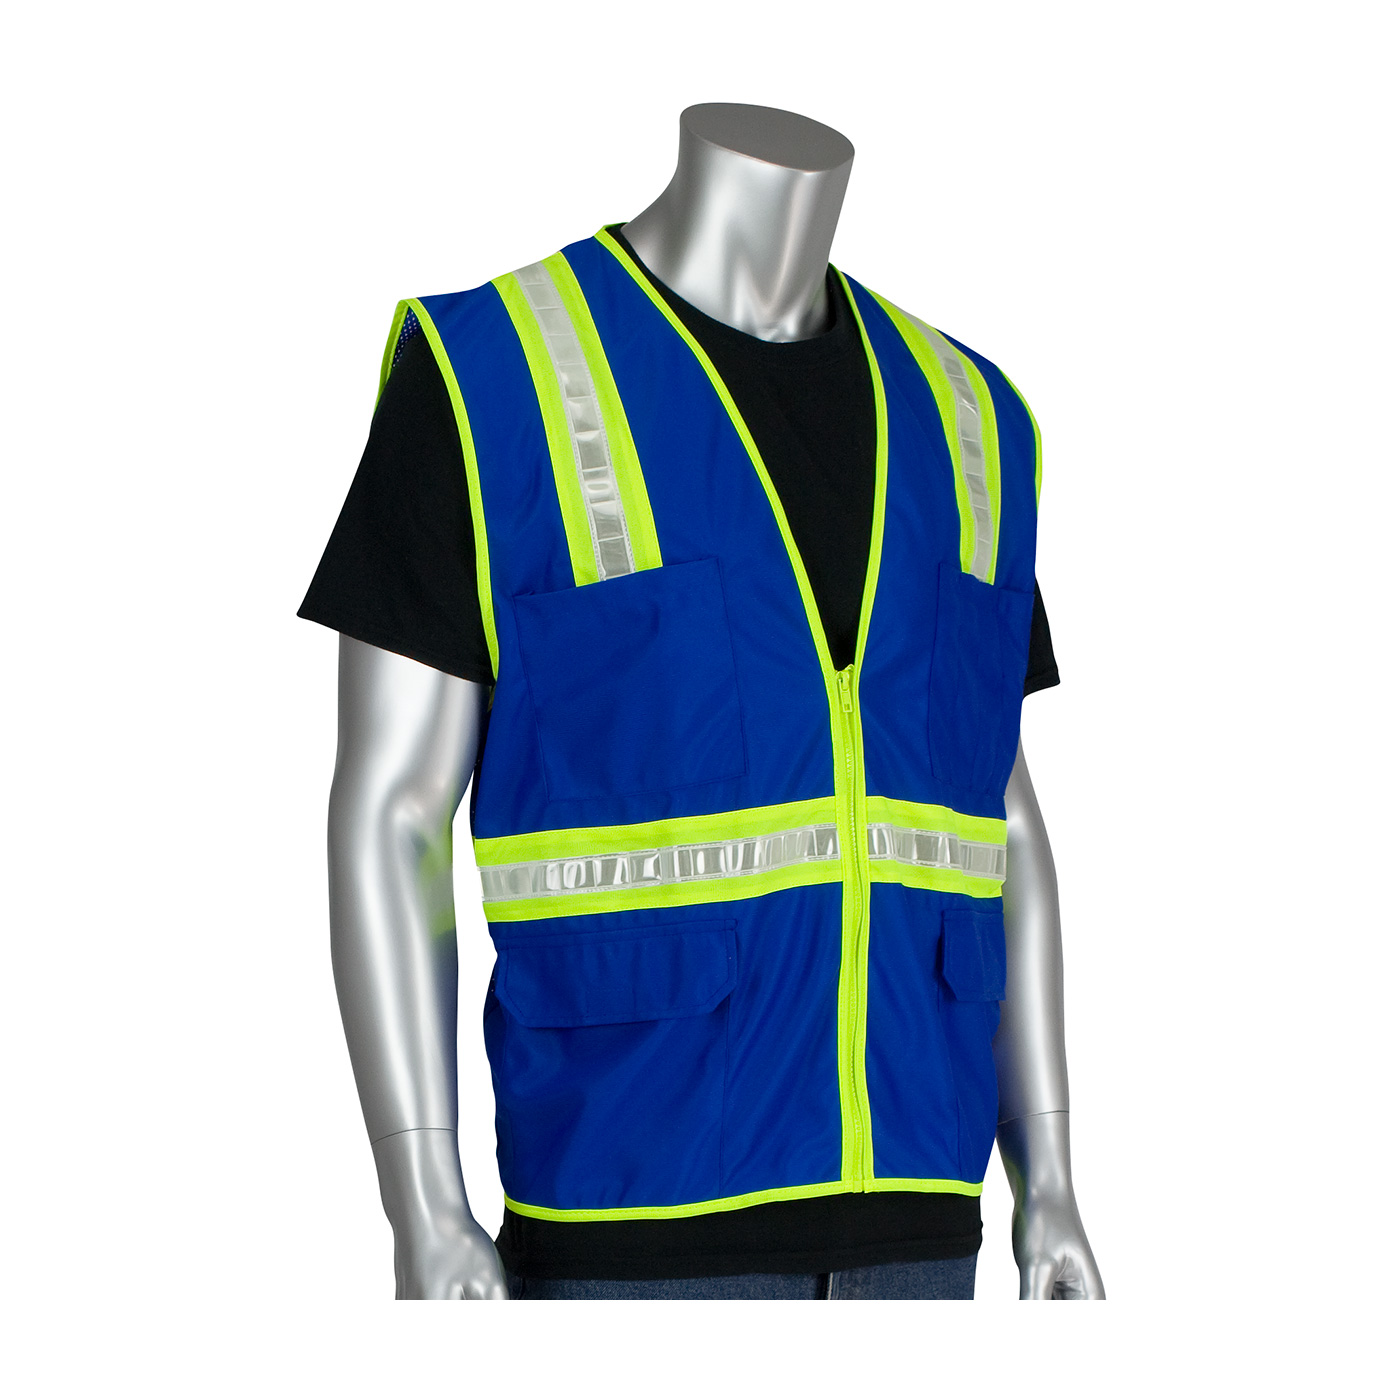 PIP 300-1000-BL/M Non-ANSI Surveyor's Style Safety Vest with a Solid Front, Mesh Back and Prismatic Tape - Medium PID-300 1000 BL M